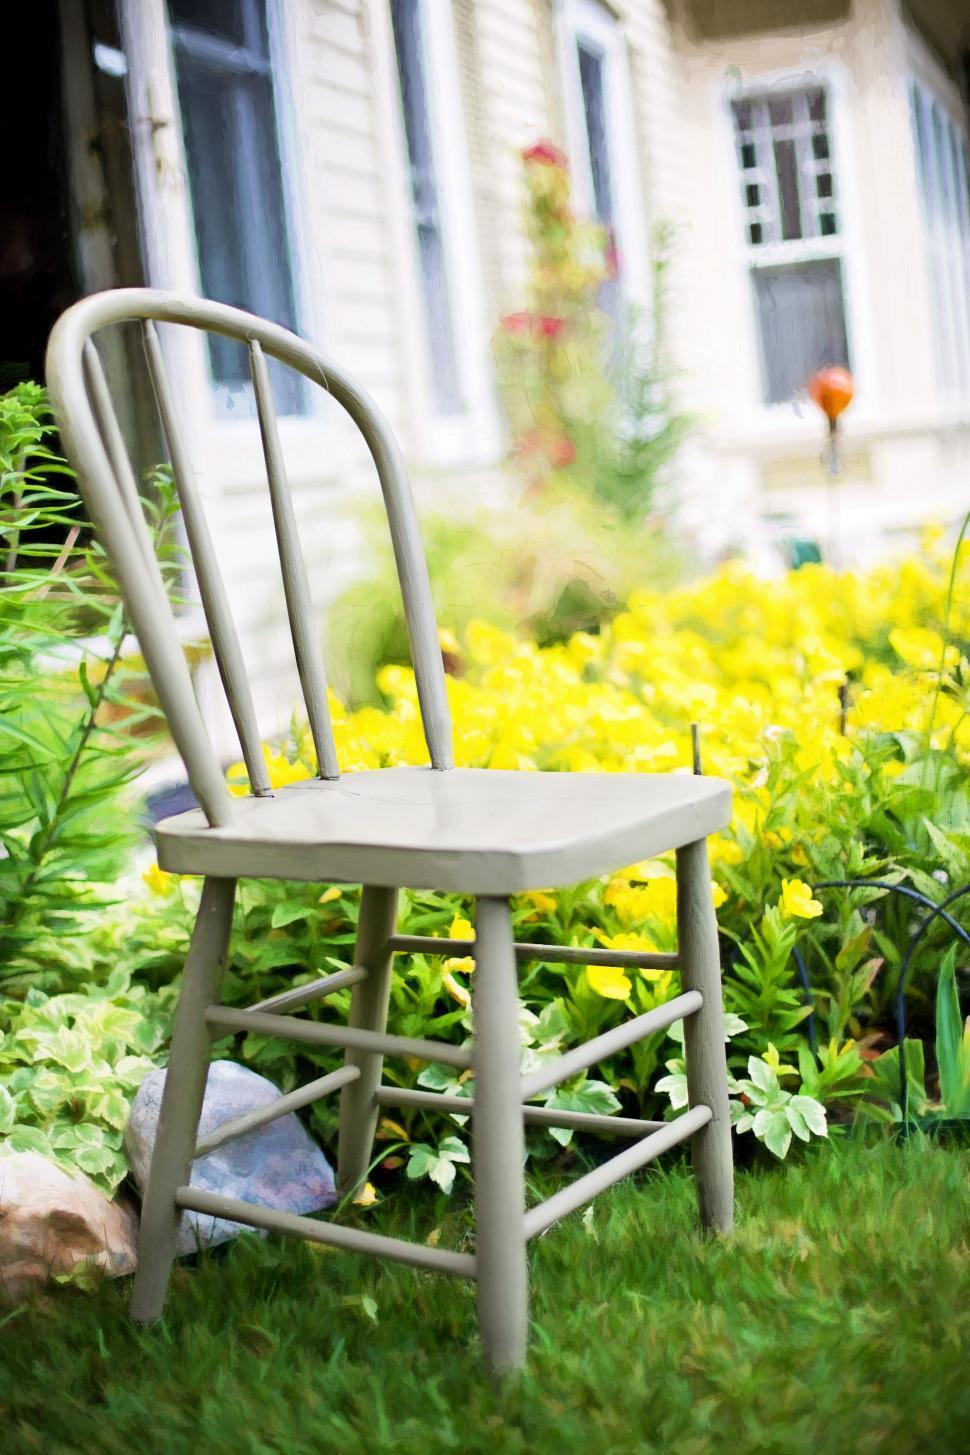 Free Image of Chair and flowers  